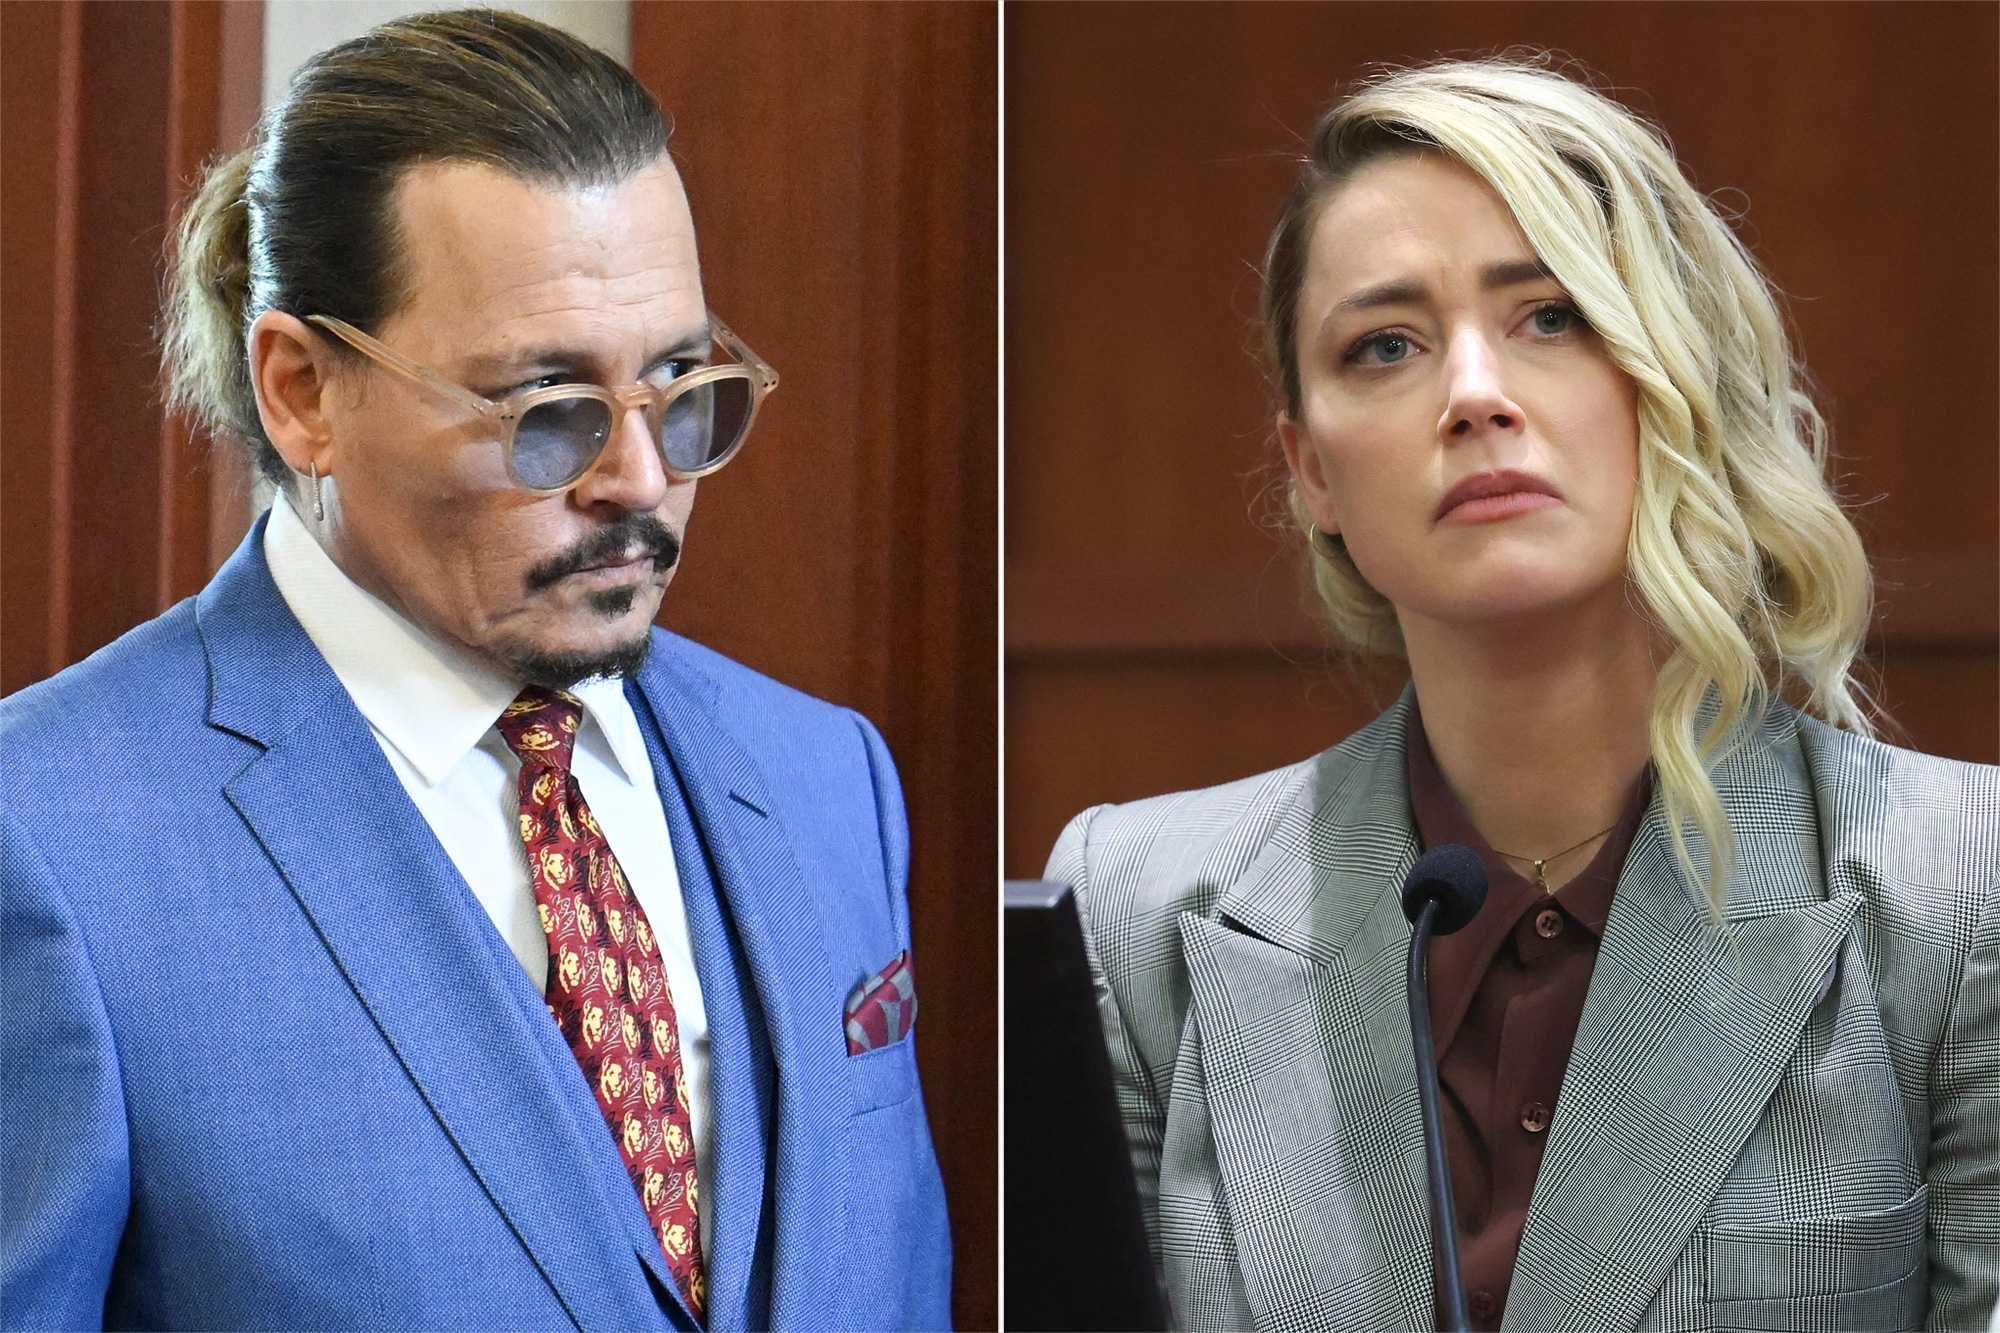 Amber Heard Heartbroken after defamation loss: What this means for free speech